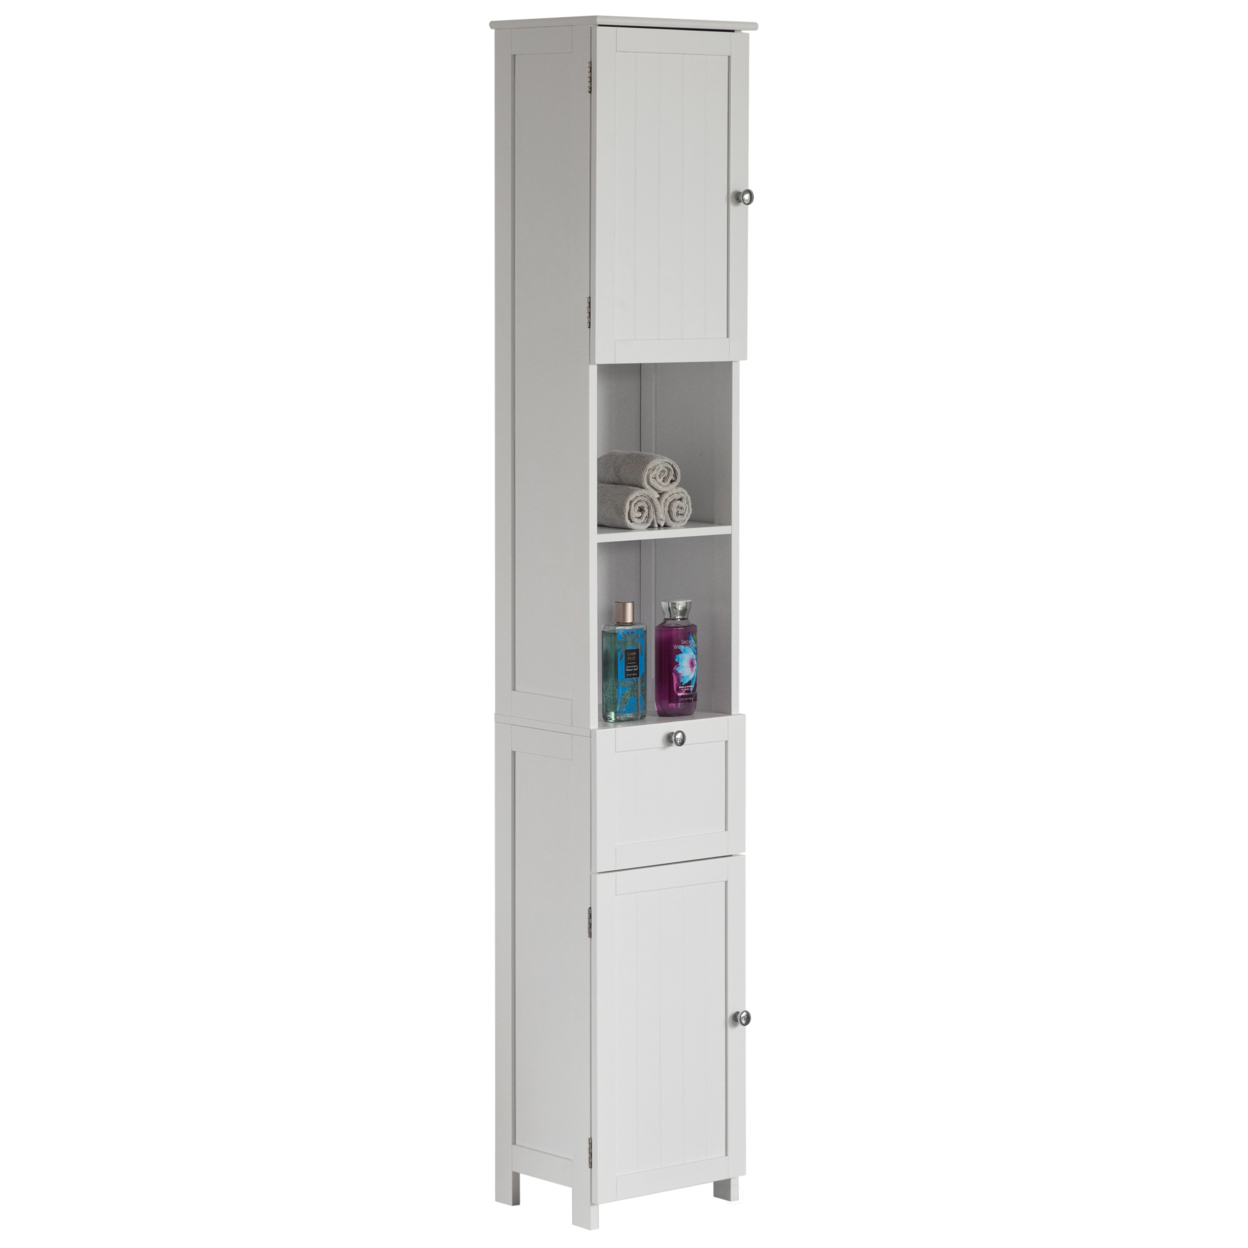 White Tall Standing Bathroom Linen Tower Storage Cabinet for Bathroom and Vanity